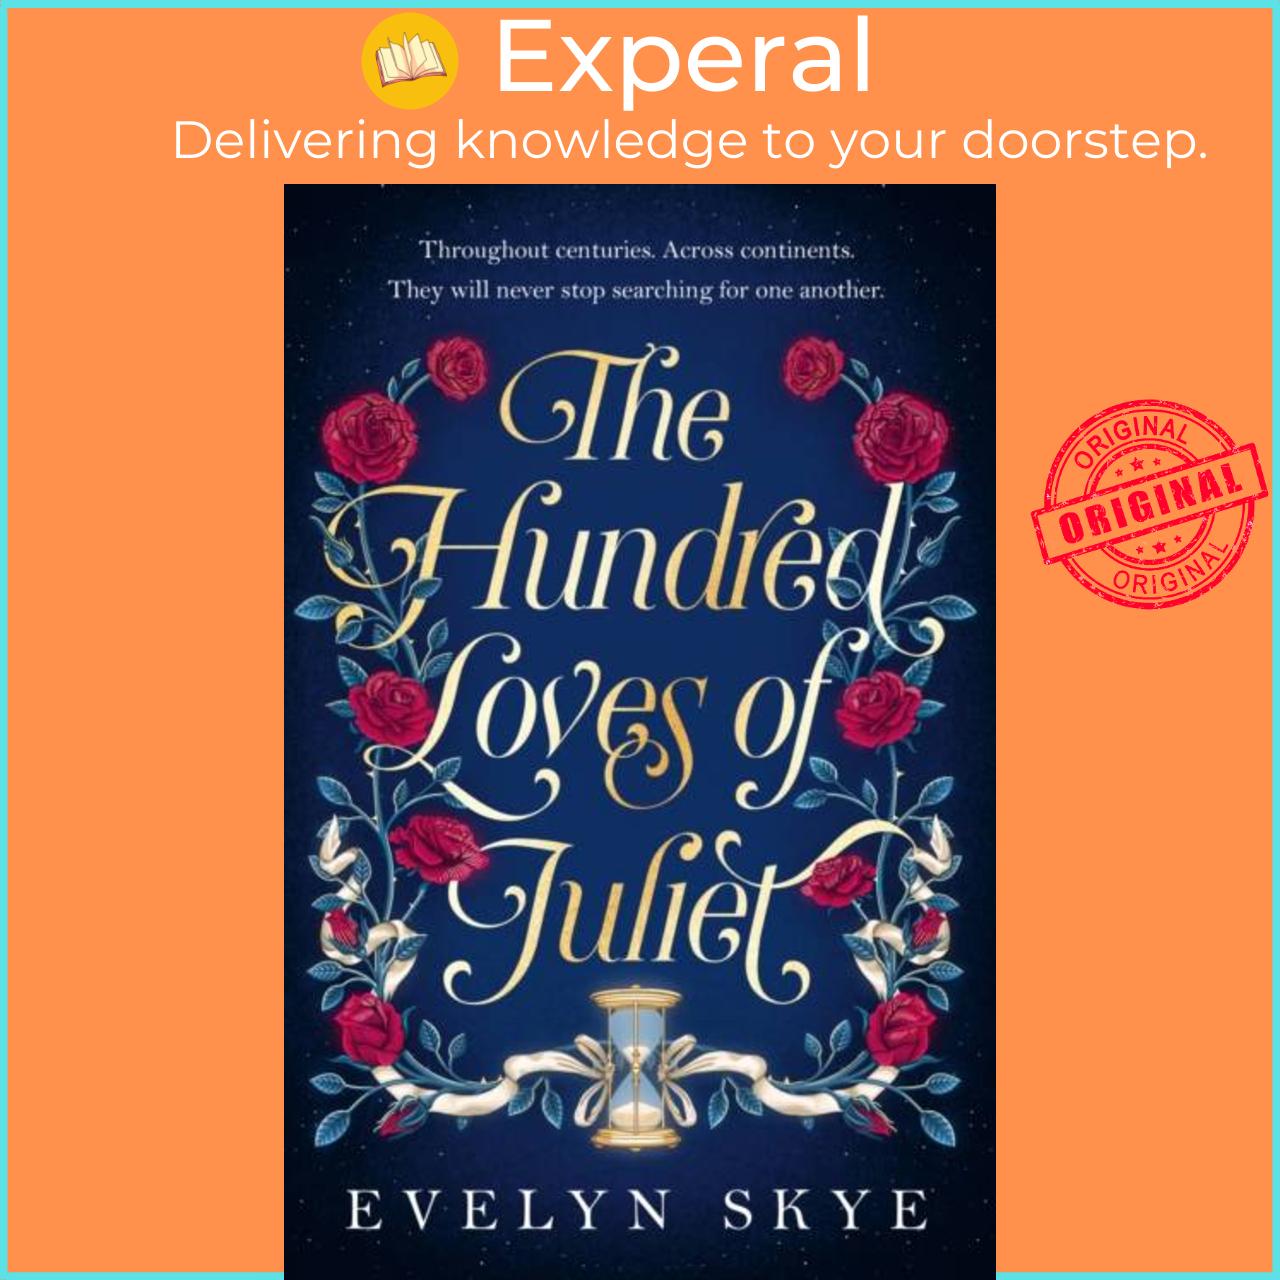 Sách - The Hundred Loves of Juliet - An epic reimagining of a legendary love stor by Evelyn Skye (UK edition, hardcover)